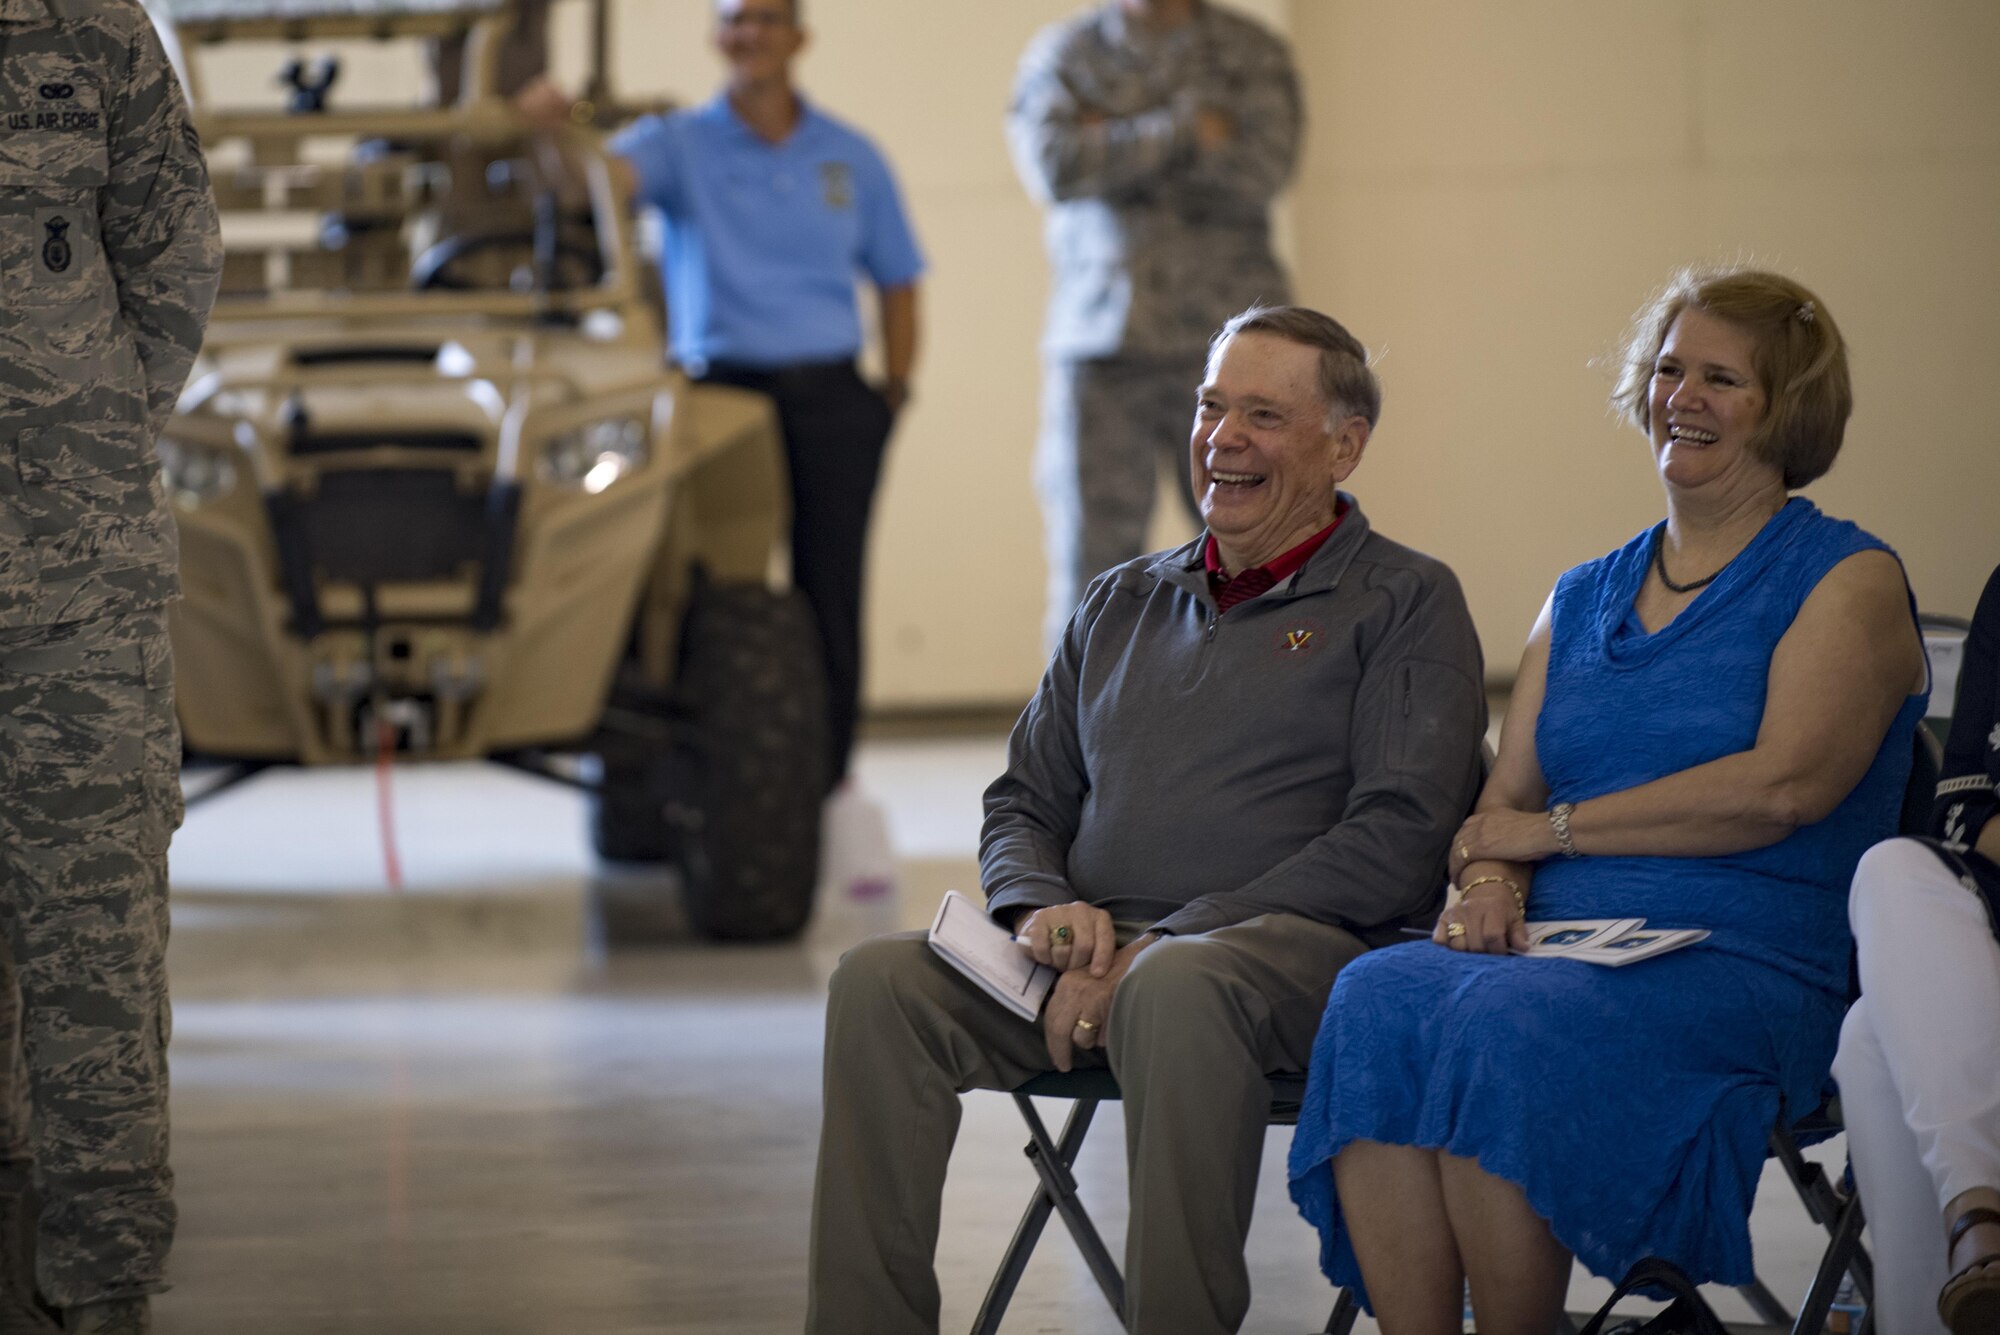 Retired chief of staff Gen. John Jumper and his wife, Ellen, laugh during the opening ceremonies of the 820th Base Defense Group’s 20th Anniversary Ceremony, March 28, 2017, at Moody Air Force Base, Ga. Jumper was a command pilot with more than 5,000 flying hours, including 1,400 combat hours. The celebration included an 820th BDG capabilities demo, a reenlistment ceremony and a formal dinner. (U.S. Air Force photo by Airman 1st Class Daniel Snider)